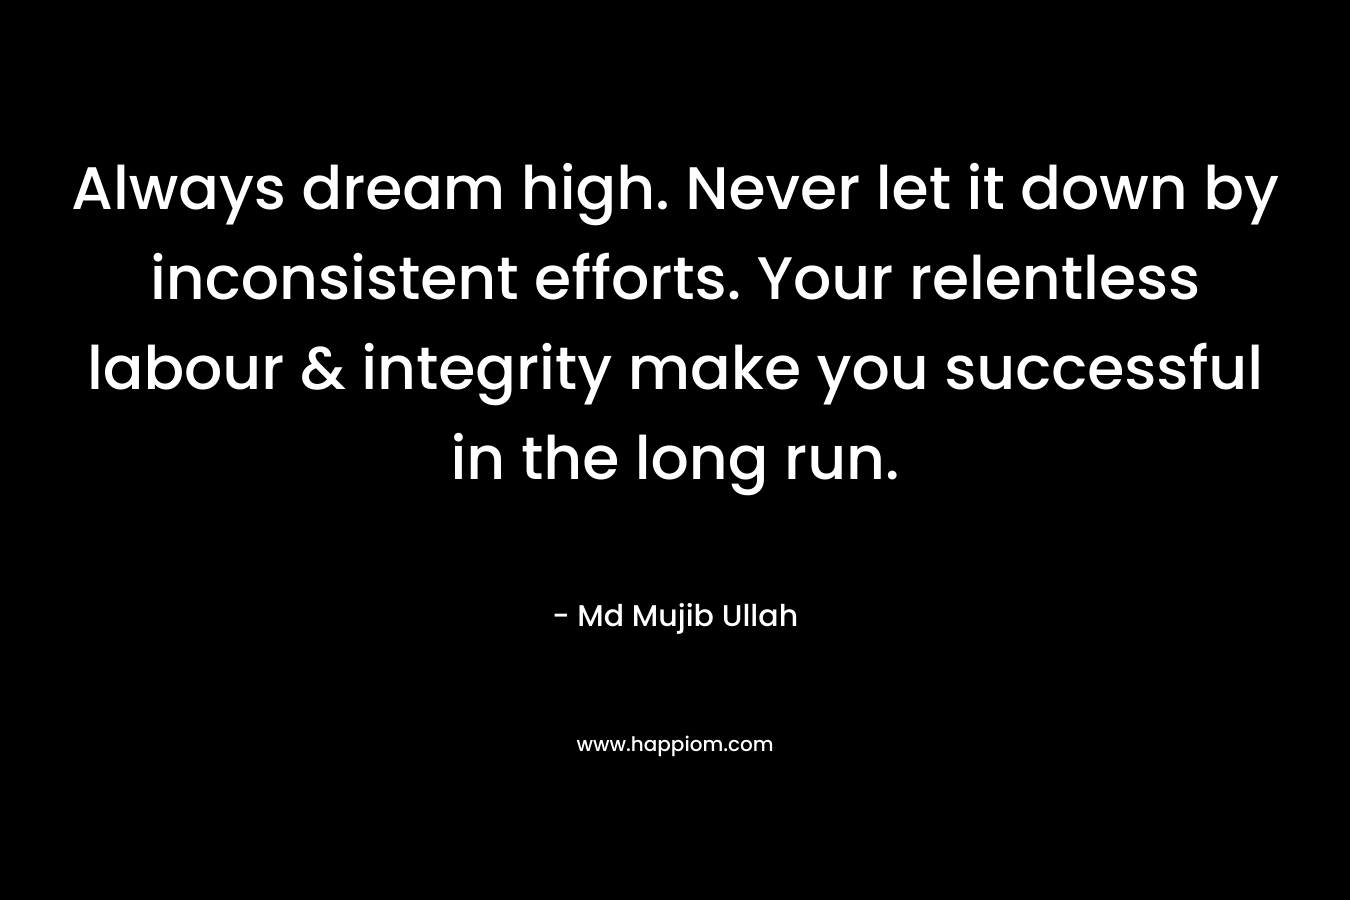 Always dream high. Never let it down by inconsistent efforts. Your relentless labour & integrity make you successful in the long run. – Md Mujib Ullah